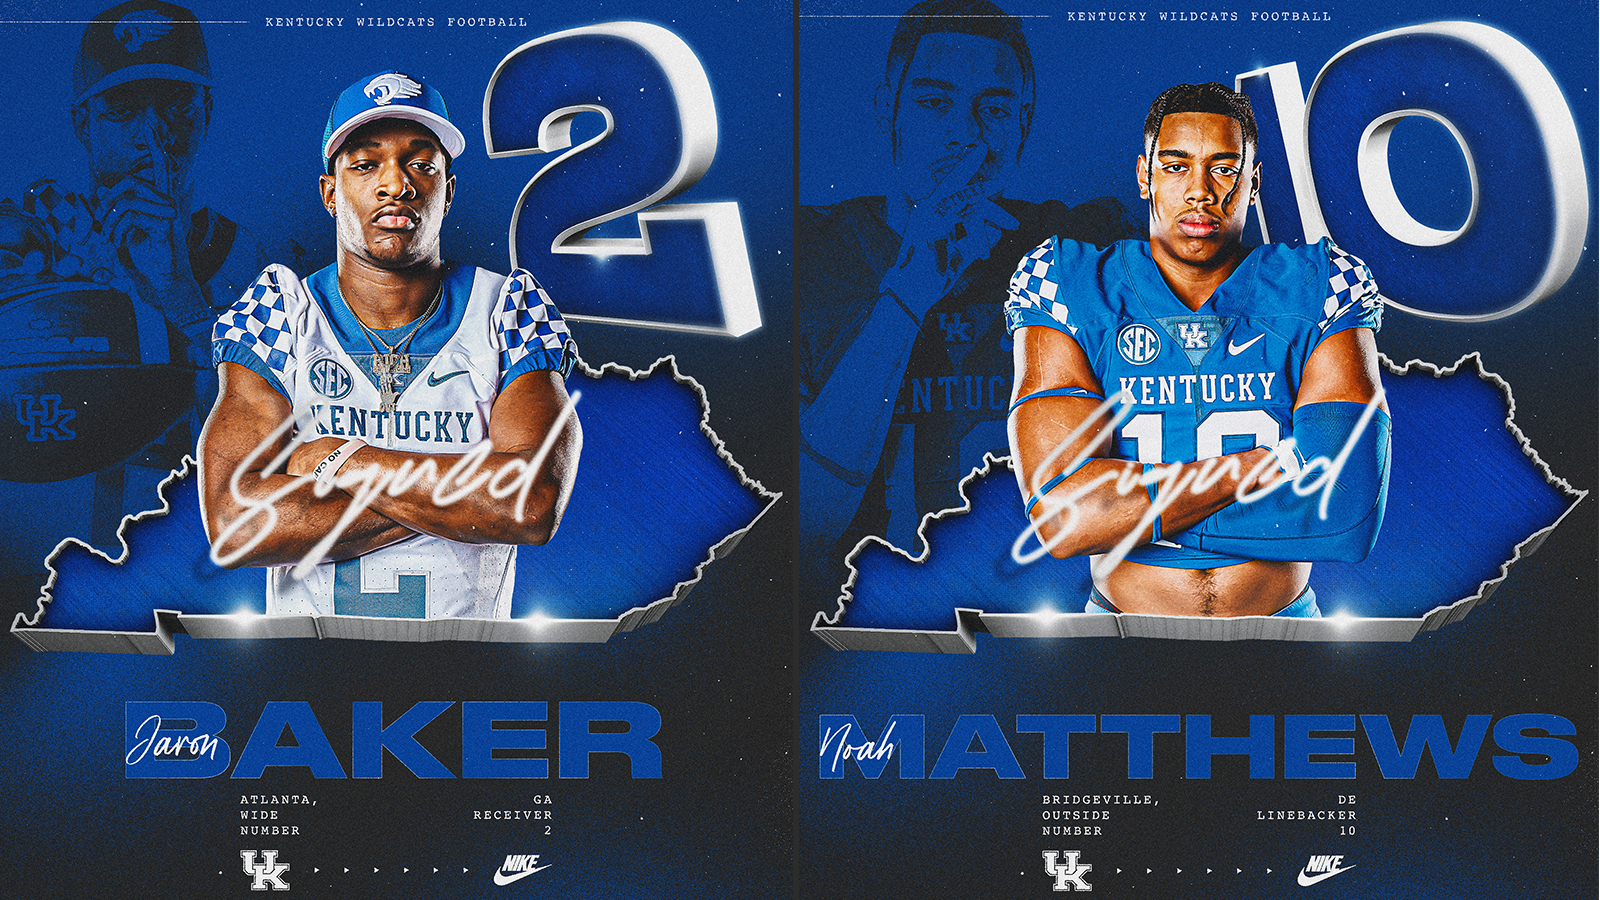 Kentucky Adds Two in February Signing Period